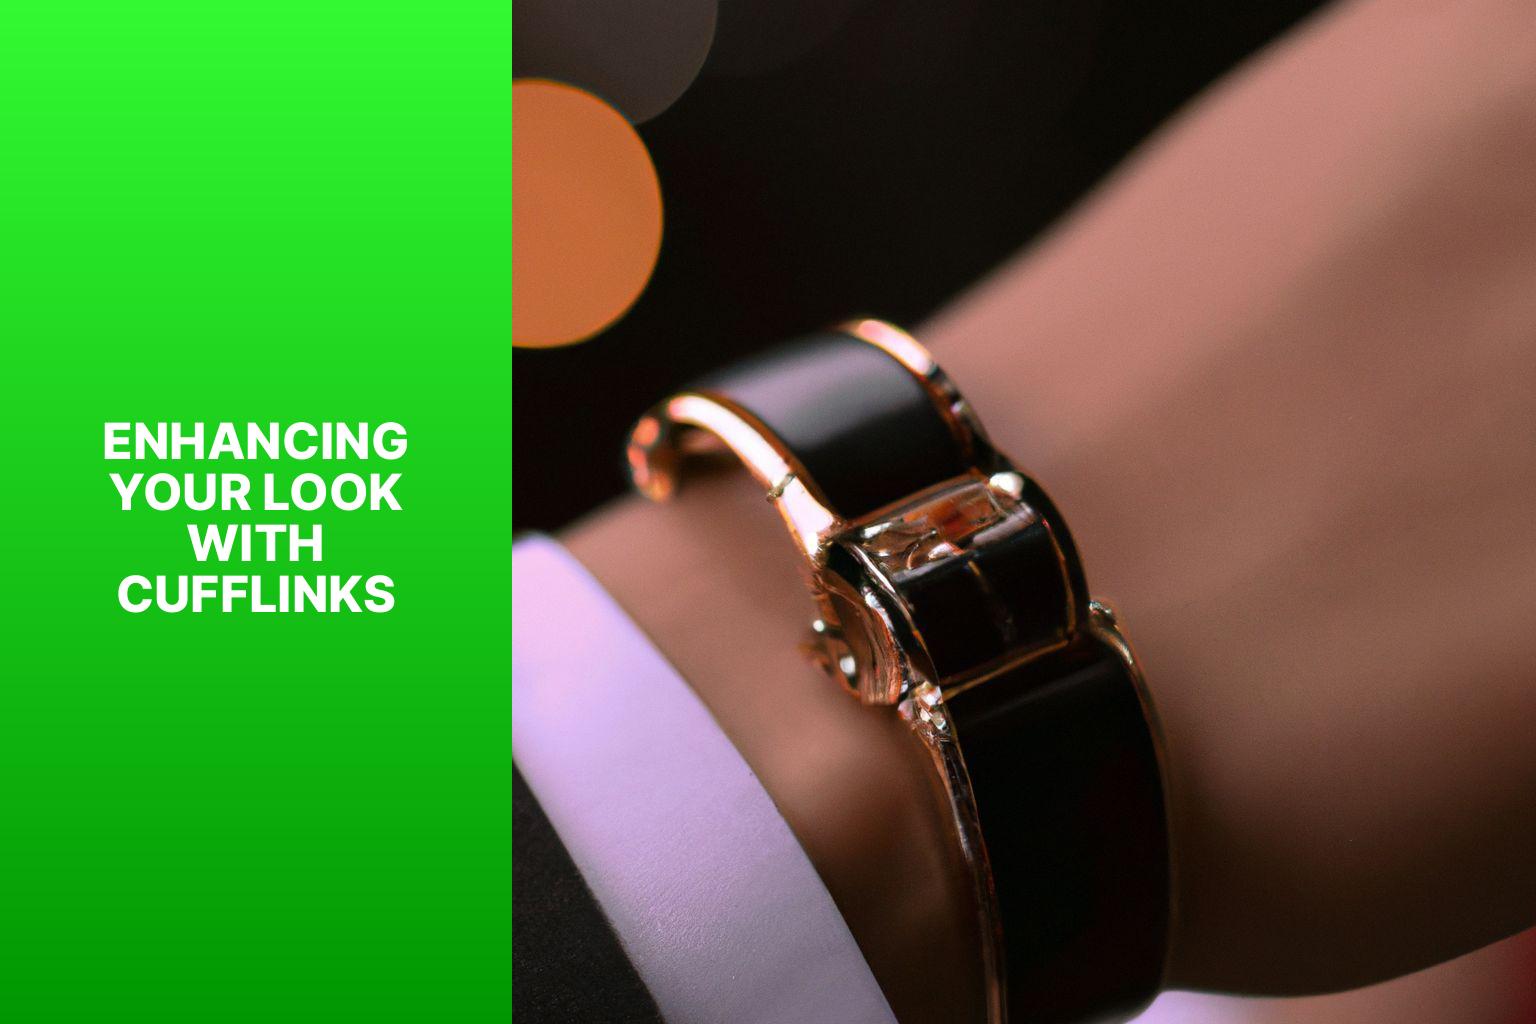 Enhancing Your Look with Cufflinks - Accessorizing with Etiquette: Watches, Cufflinks, and More 